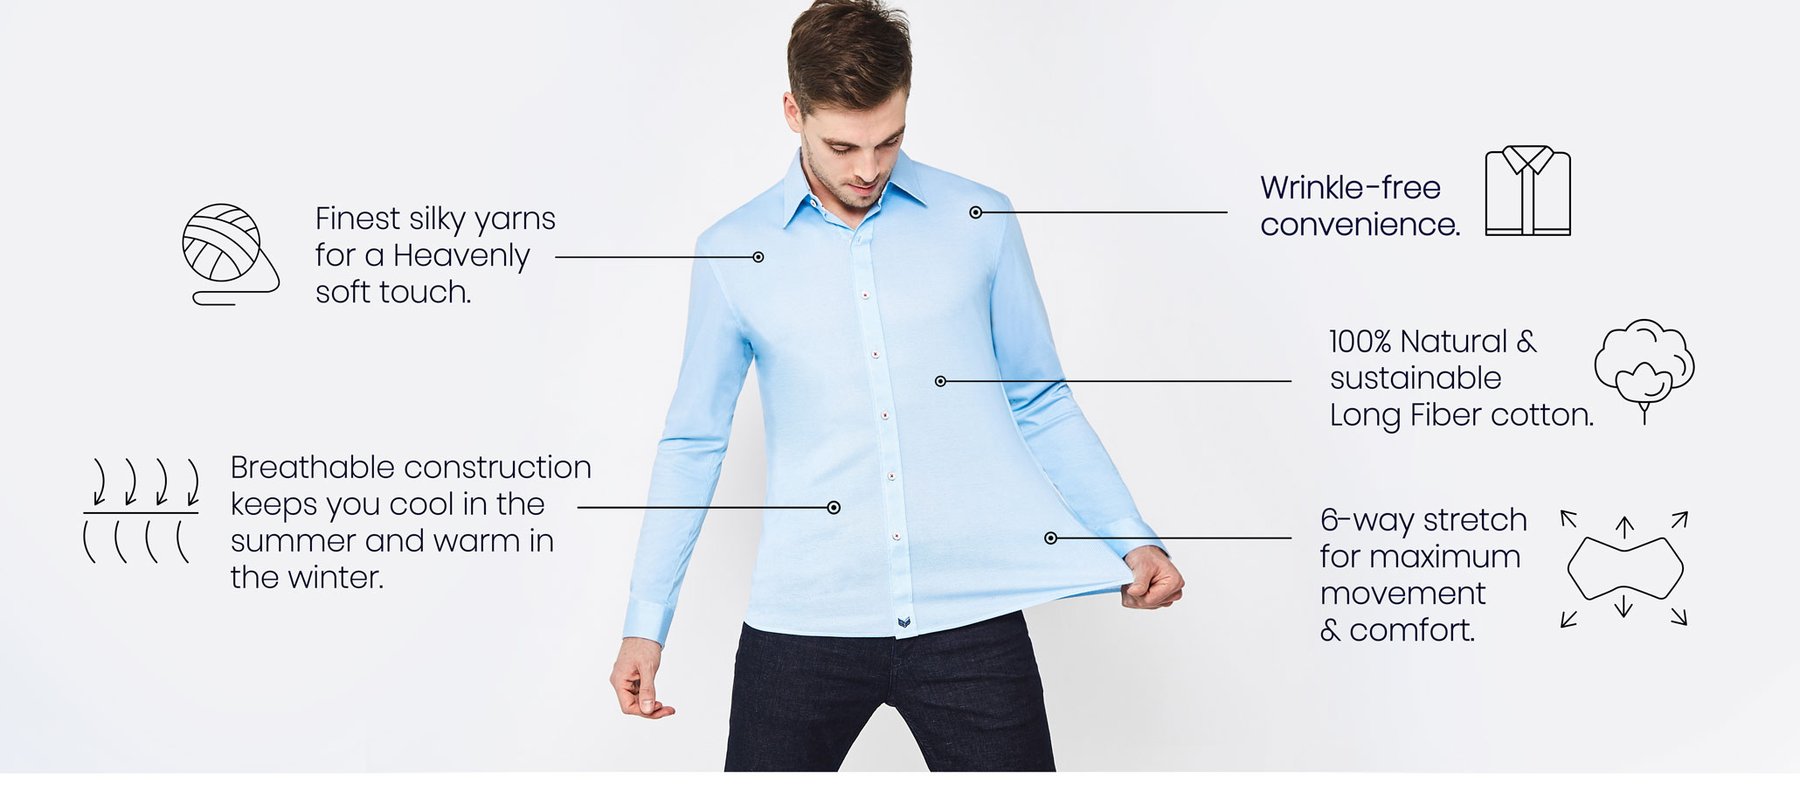 men's athletic fit dress shirts characteristics to look for when shopping